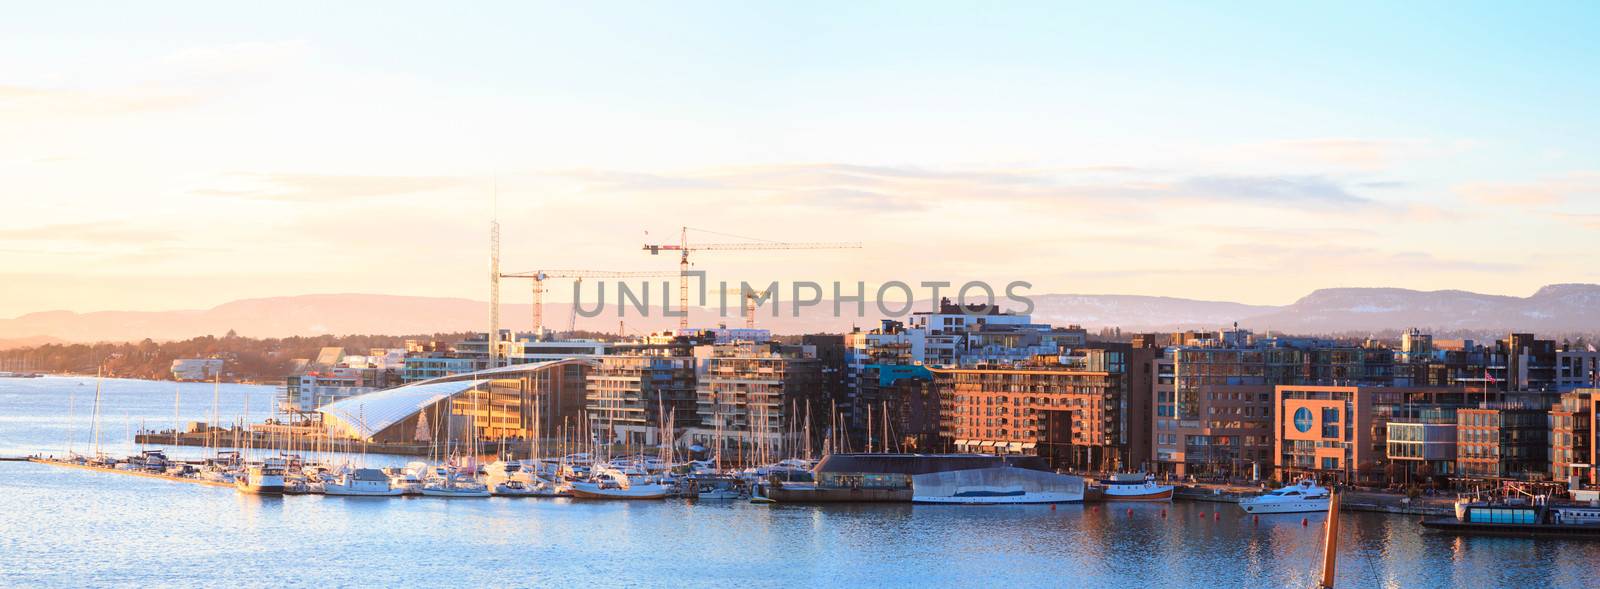 Oslo harbour Panorama by vichie81